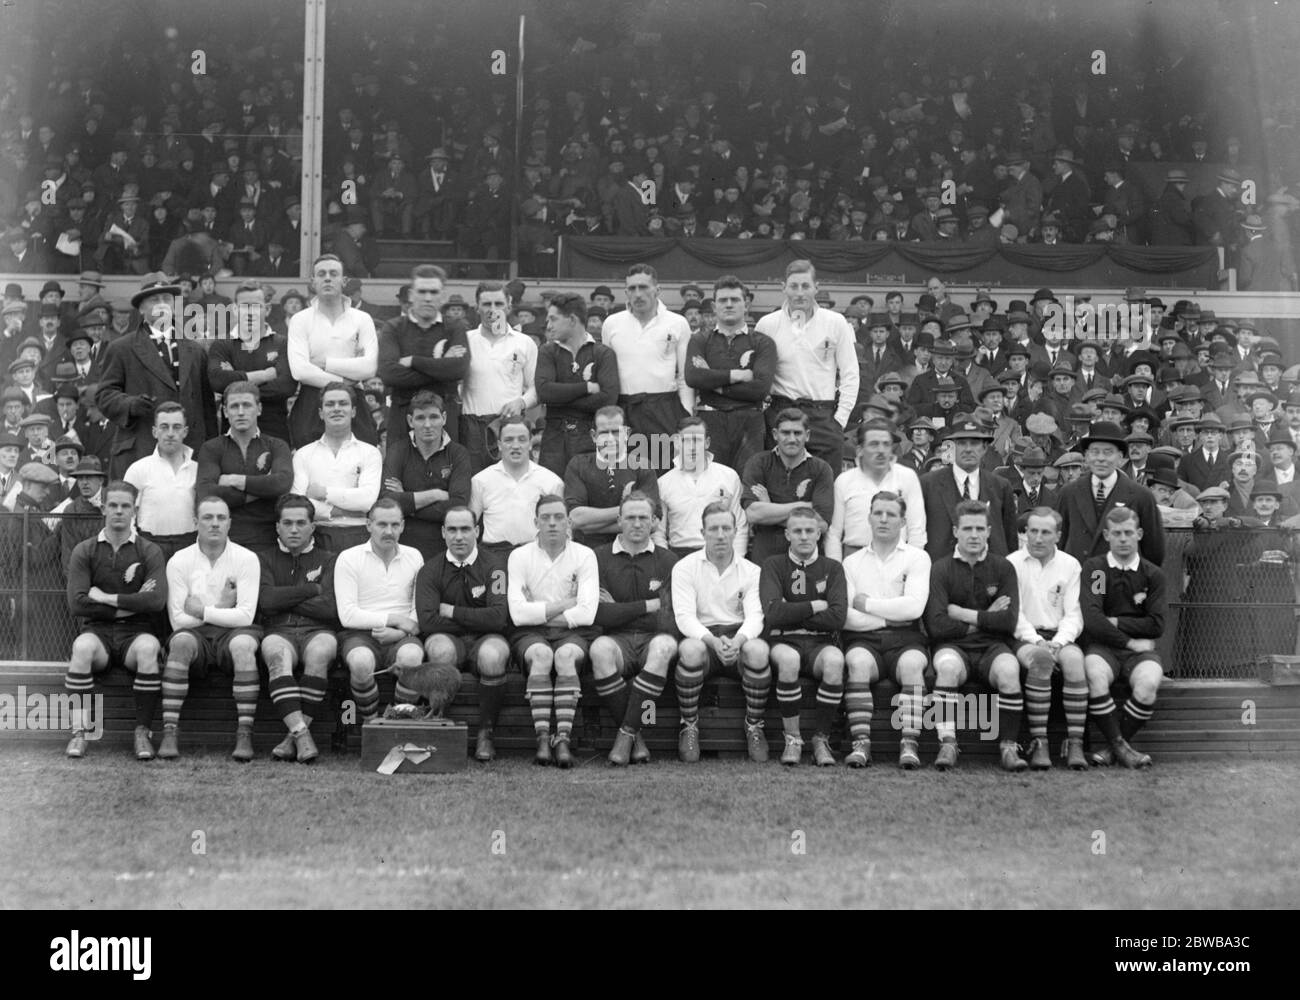 The King sees Combined Services team defeated by the All Blacks at Twickenham . The two teams photographed together before the match . 13 December 1924 Stock Photo